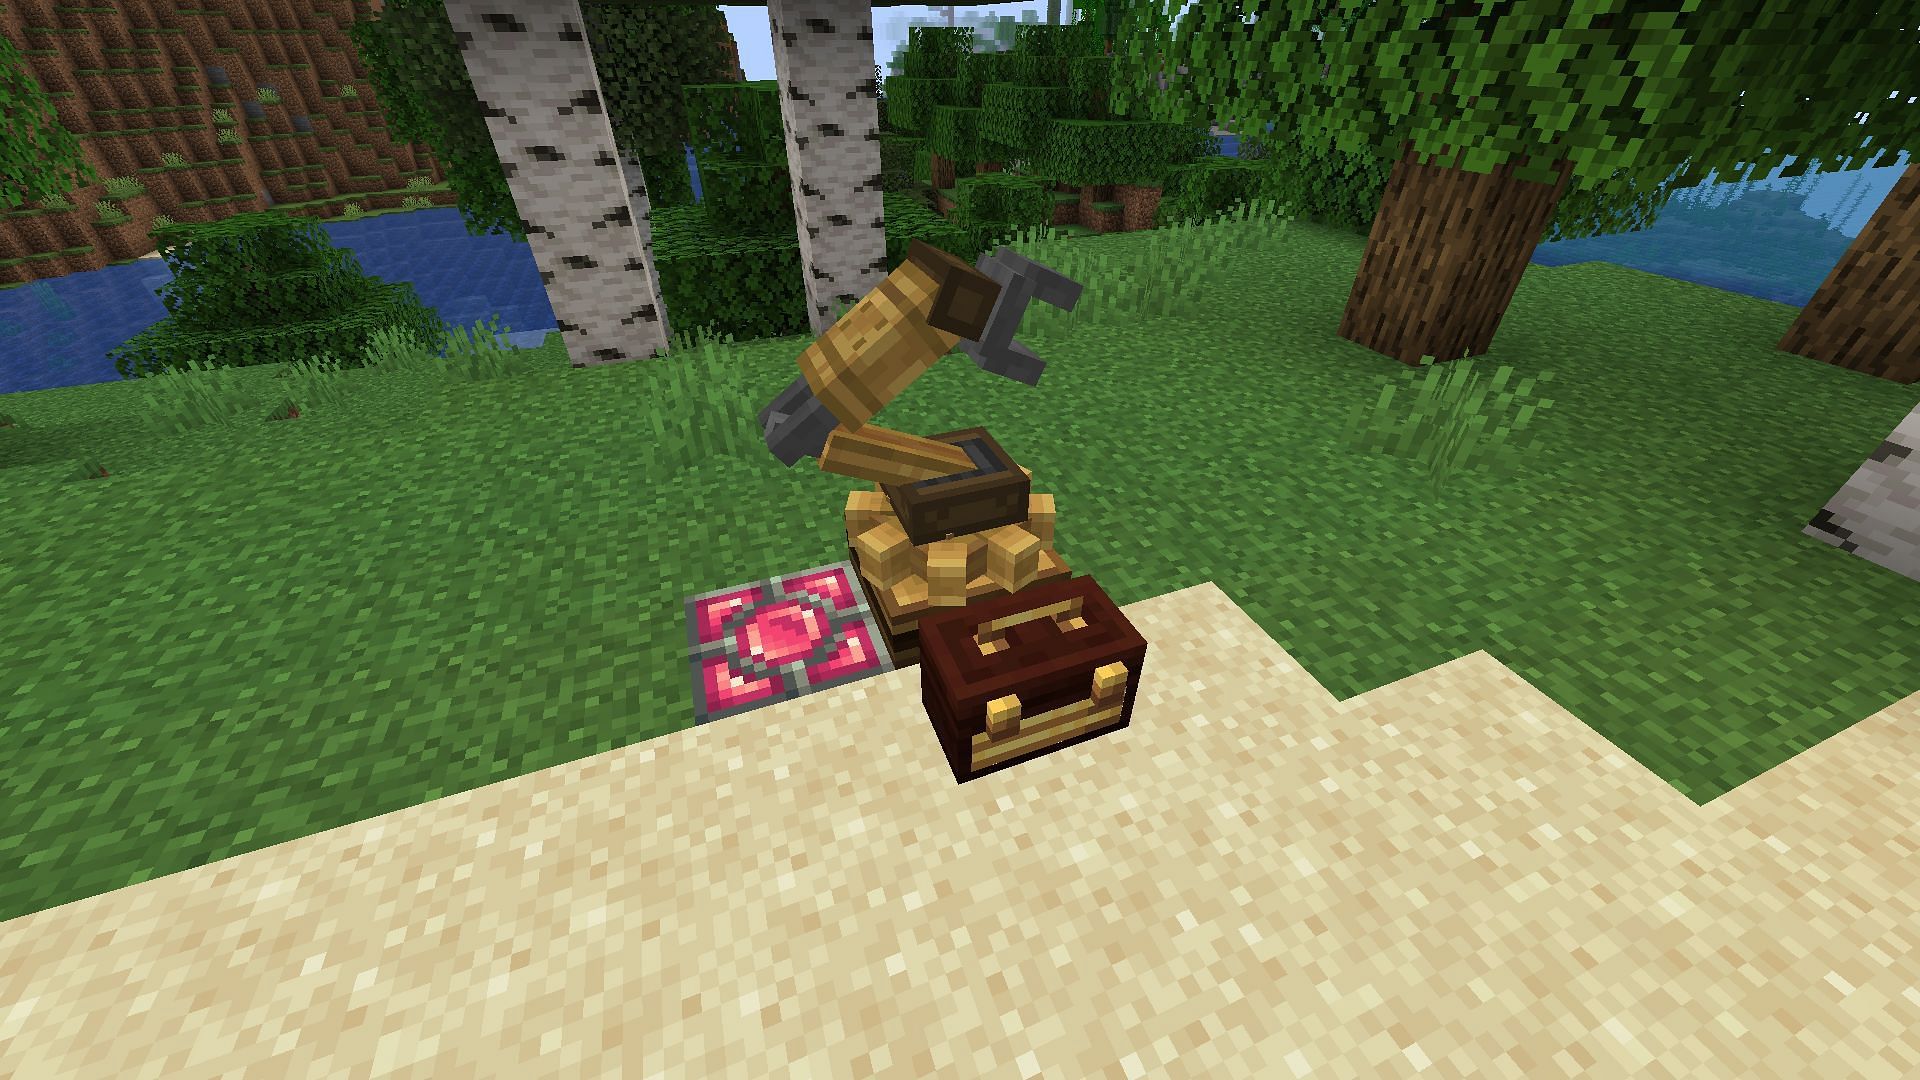 A few of the items from the Create mod (Image via Minecraft)